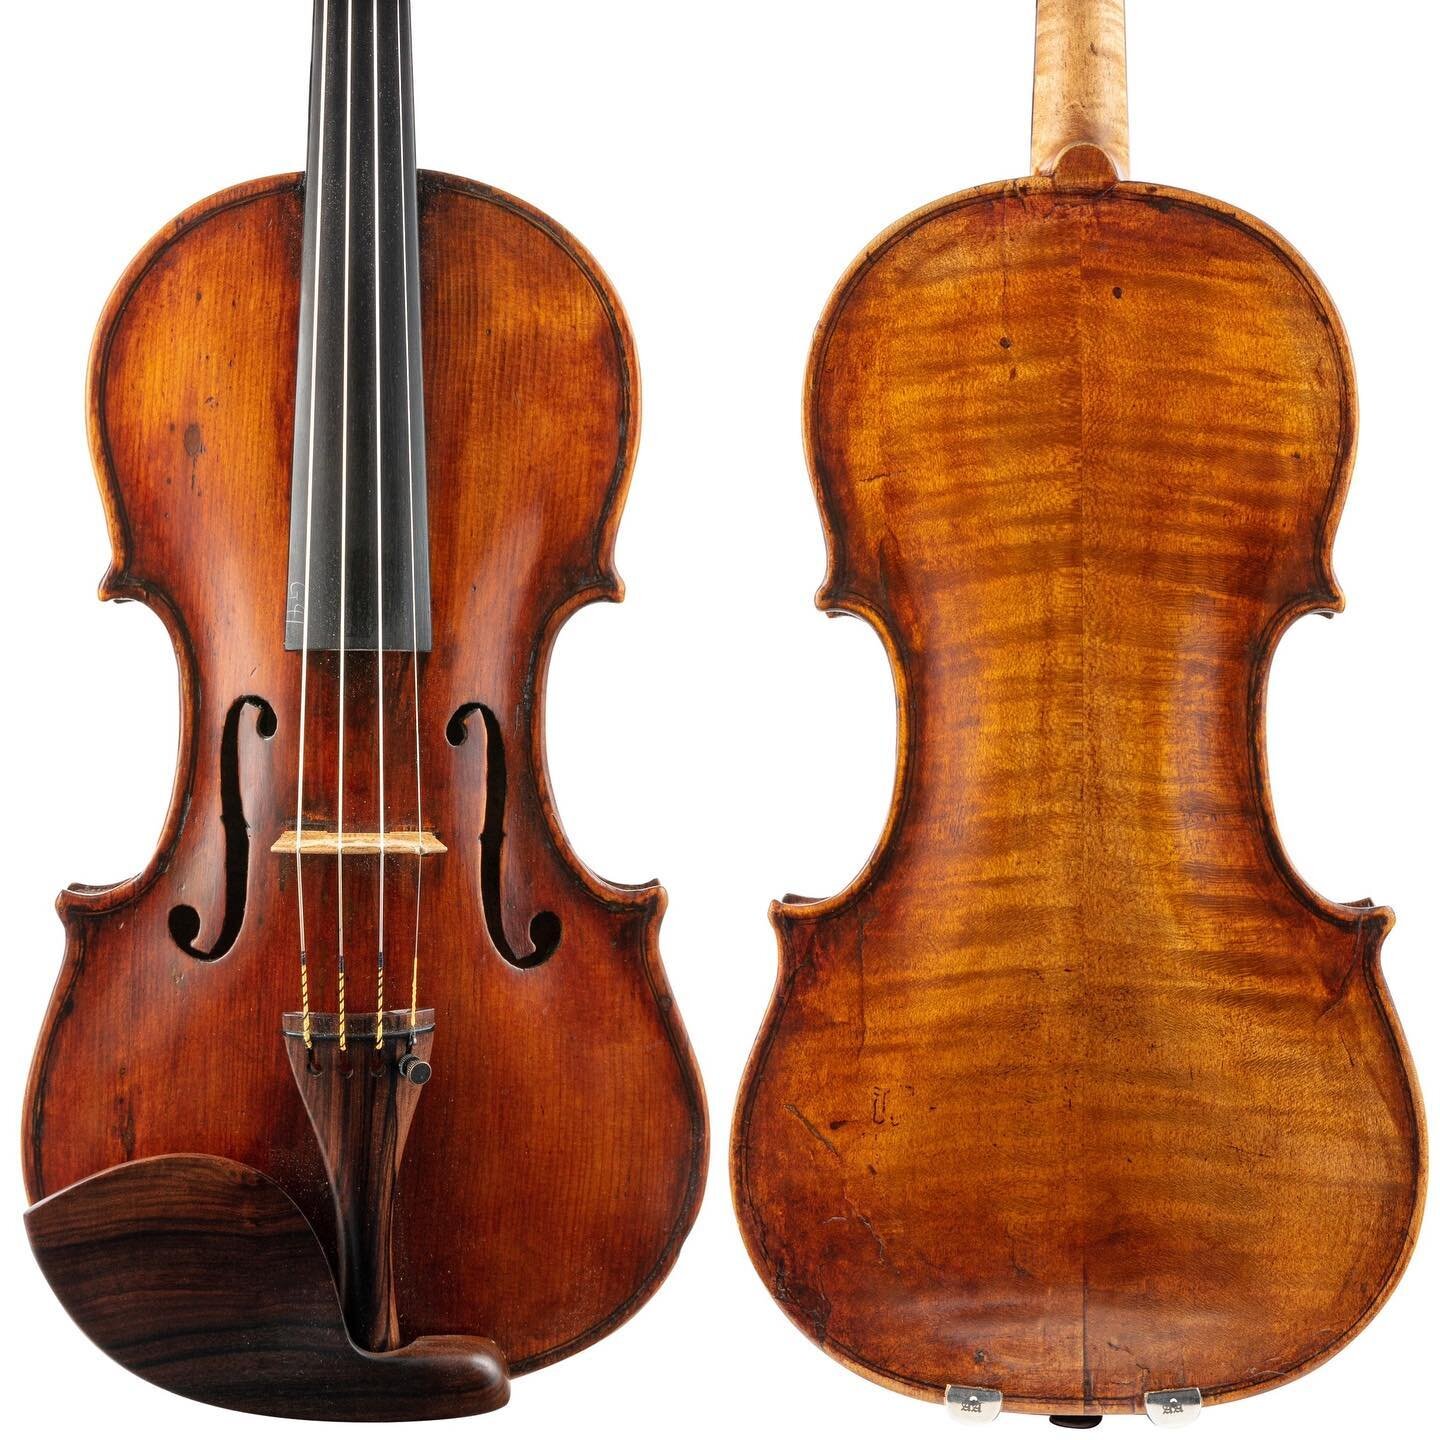 A beautiful Italian violin for sale at the Ruschil &amp; Bailly workshop. Possibly by a member of the Pelizon family c.1810, it has a classic Italian tone and sounds stunning in all registers.

For full details and to hear the violin visit: ruschilan